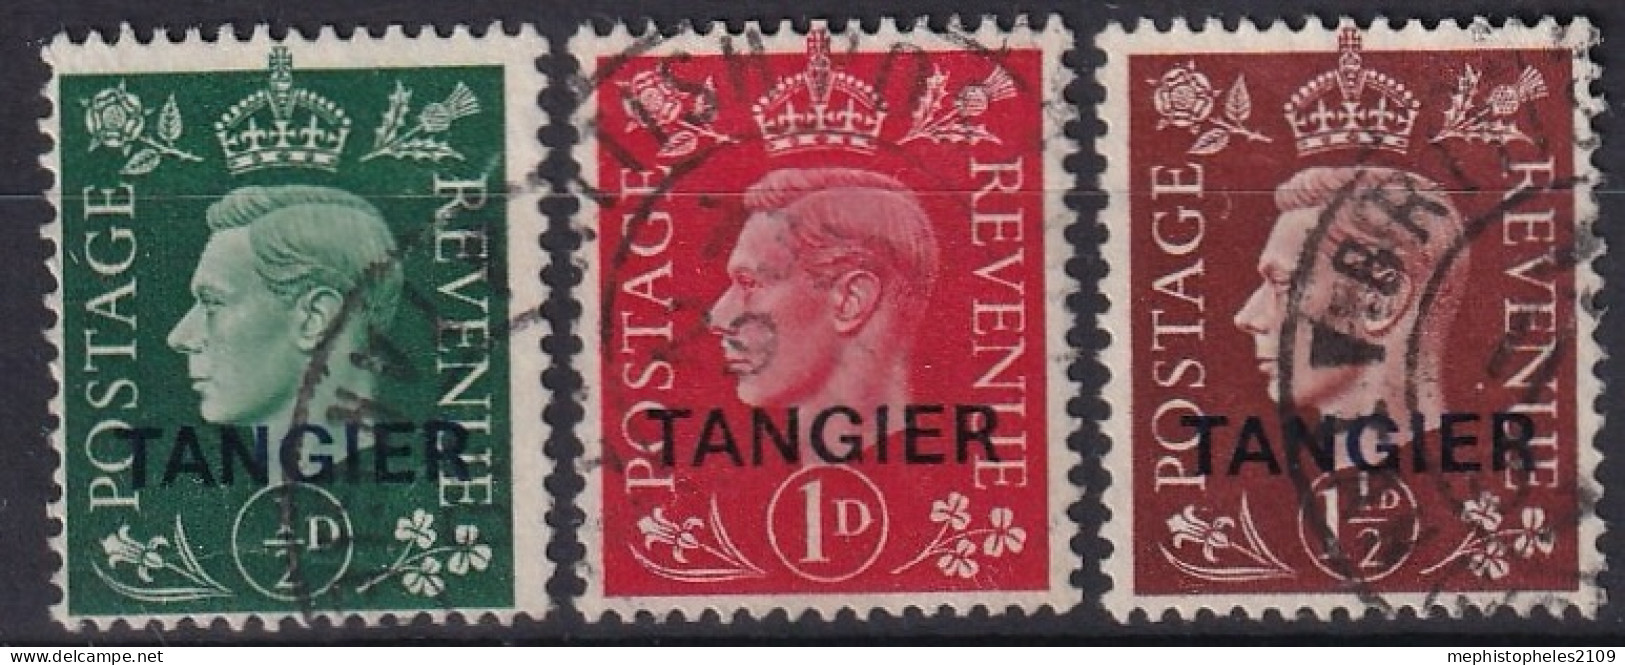 TANGIER 1937 - Canceled - SG# 515-517 - Morocco Agencies / Tangier (...-1958)